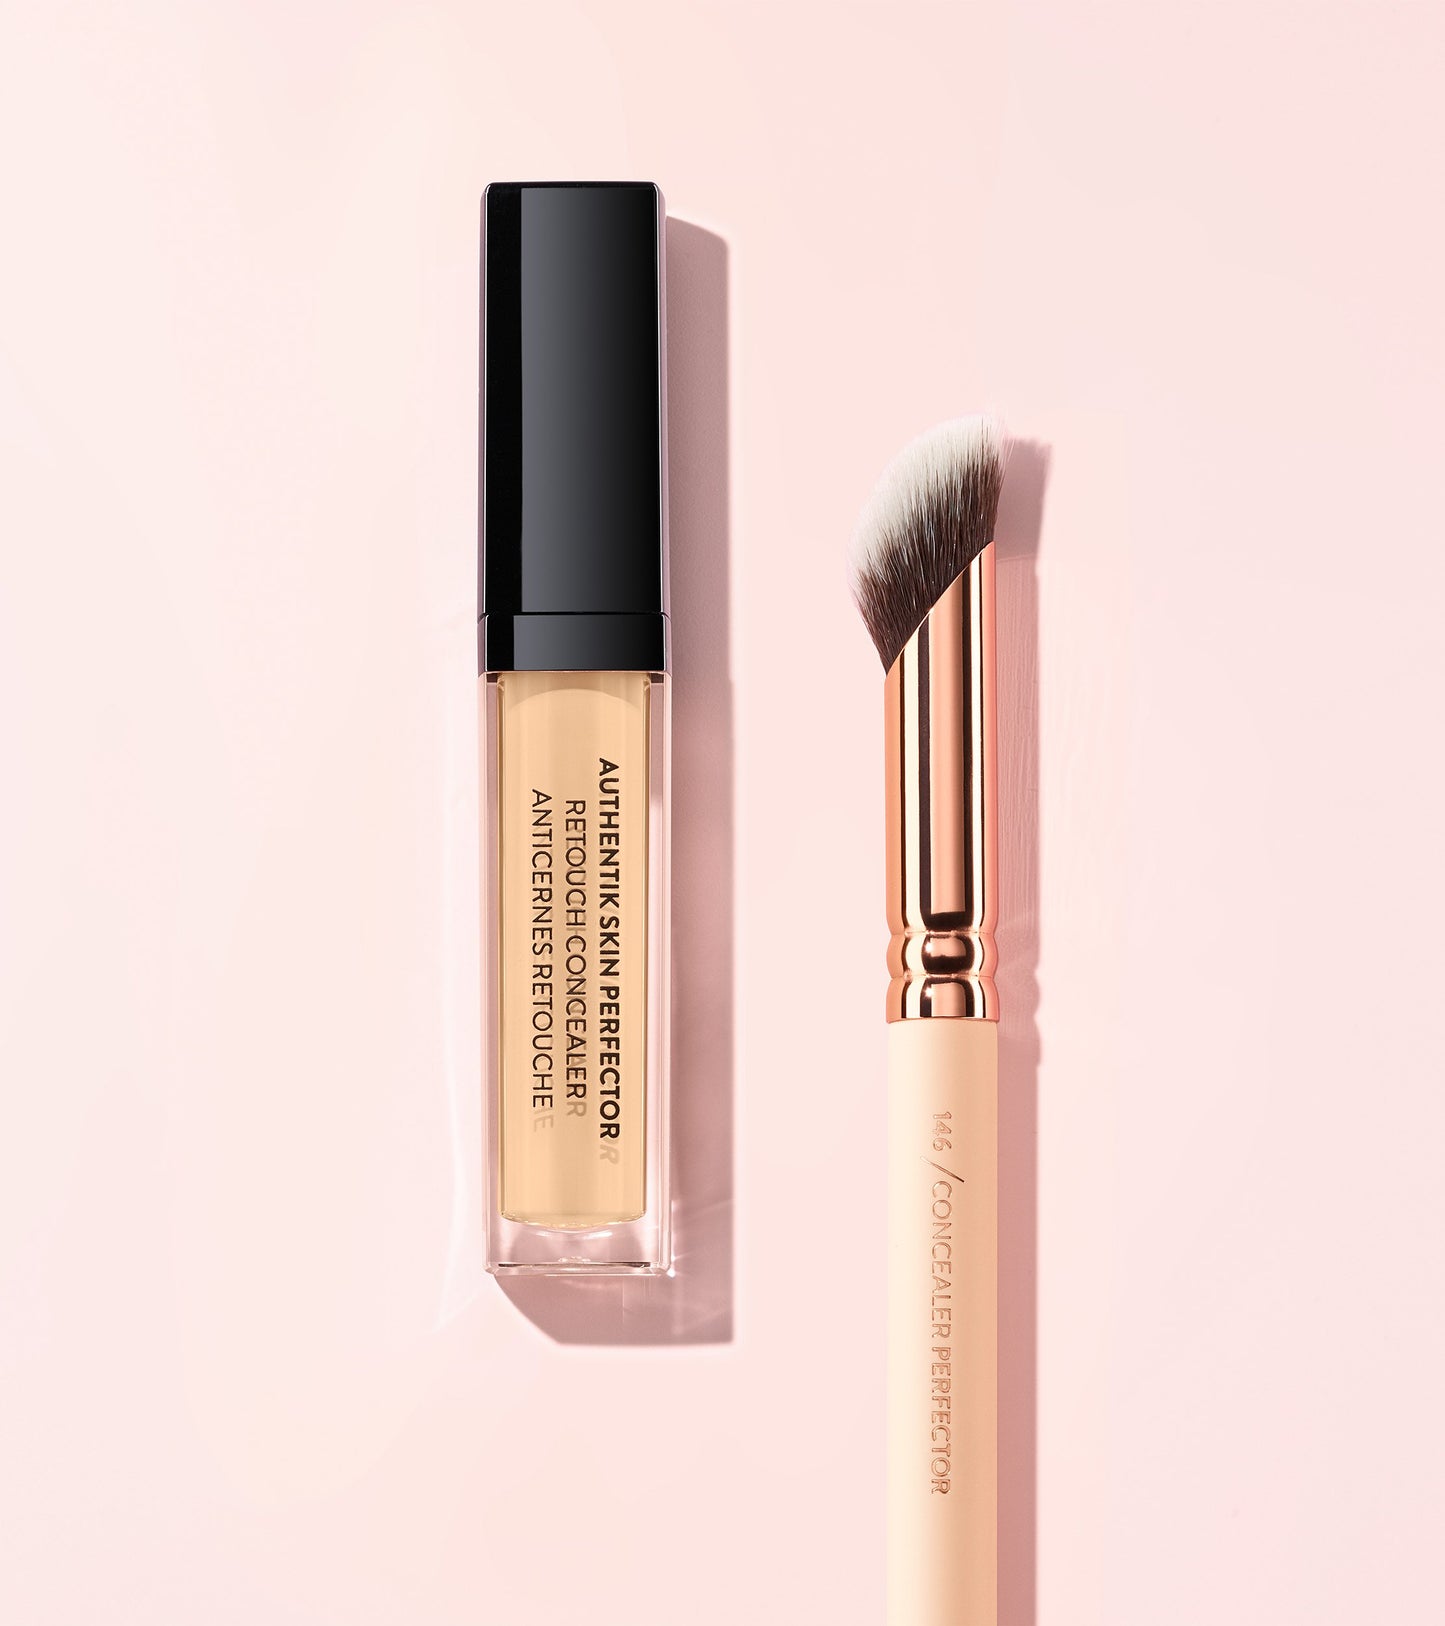 AUTHENTIK SKIN PERFECTOR CONCEALER (190 POSITIVE) Expanded Image 3